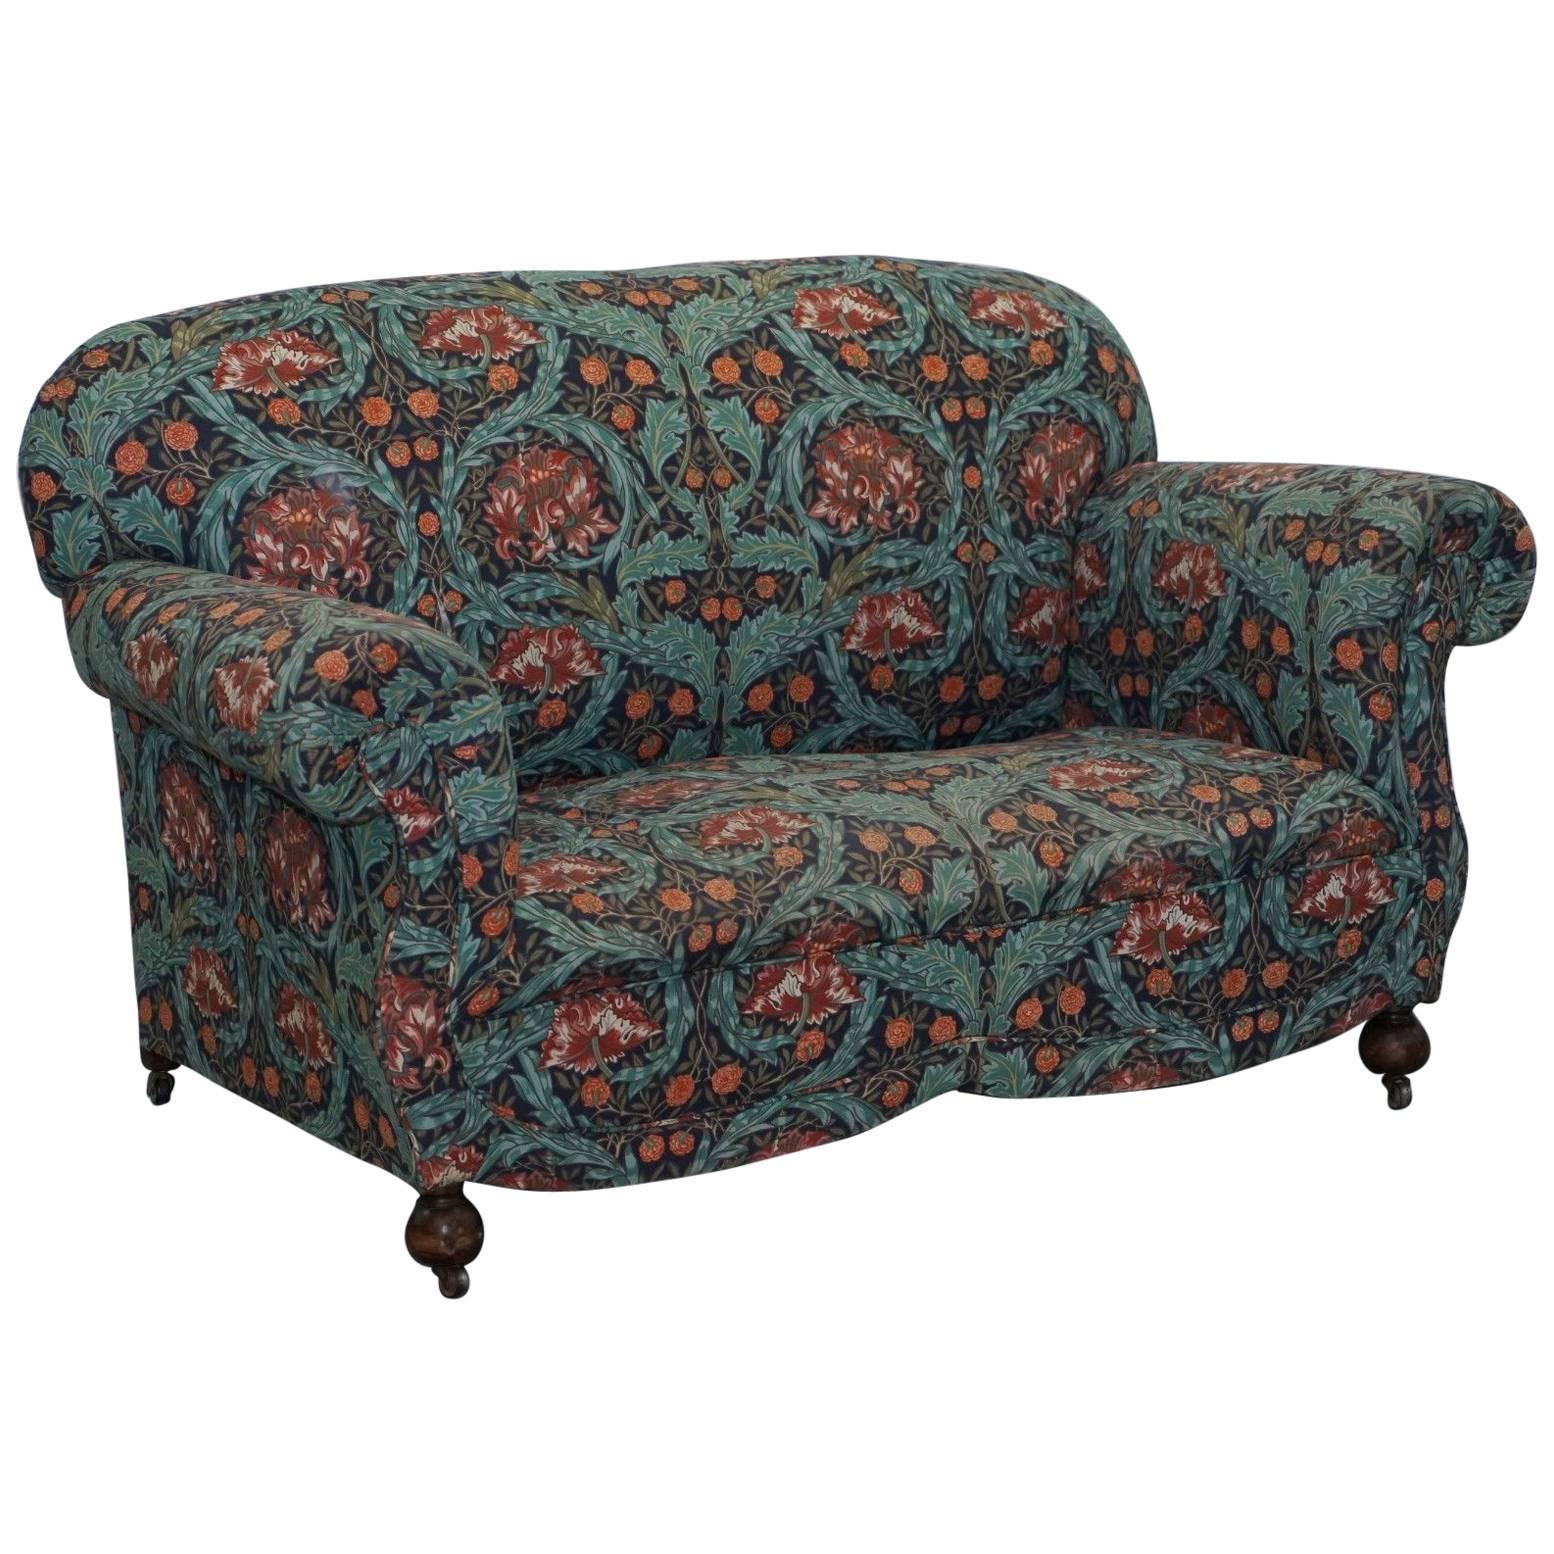 Victorian Drop Arm Club Sofa in William Morris Upholstery Fabric Part of a Suite